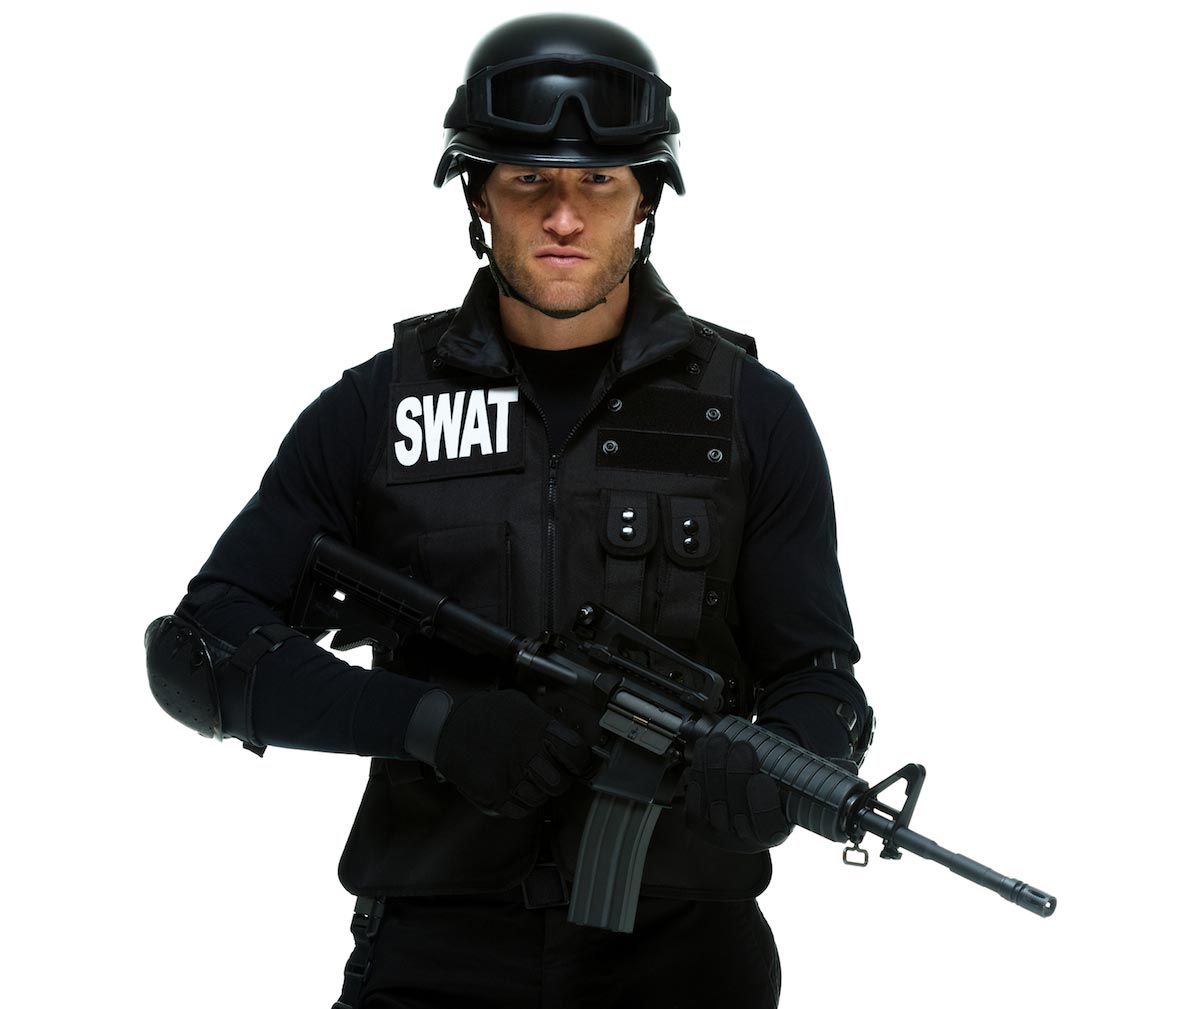 Why are American police departments stocking up on riot control gear?